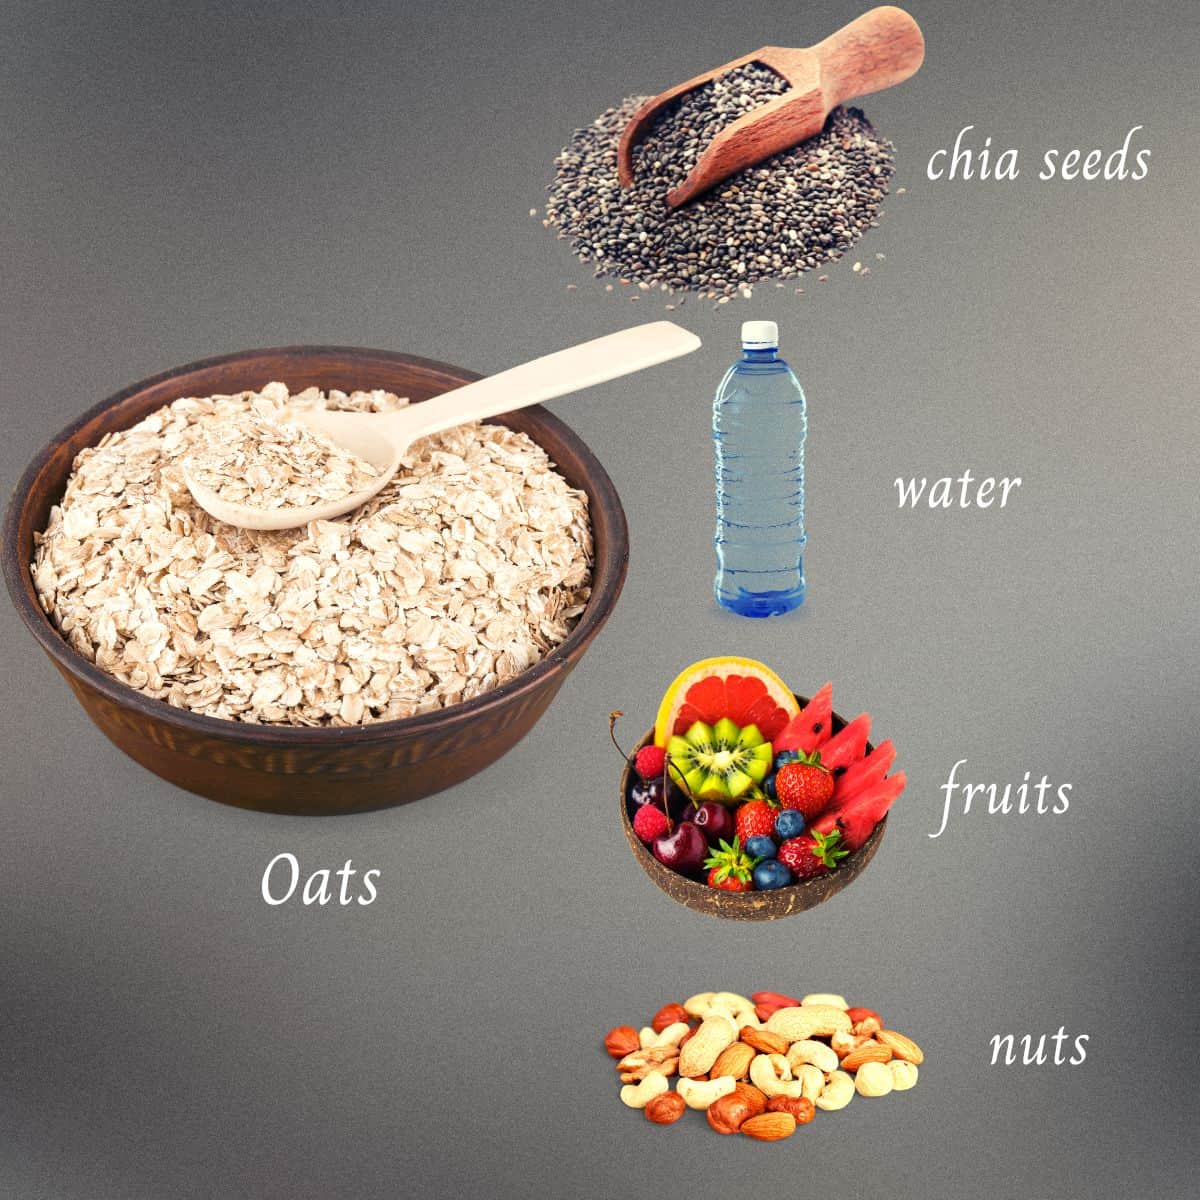 overnight oats making requirements such as oats, chia seeds, water, fruits and nuts shown in the image.